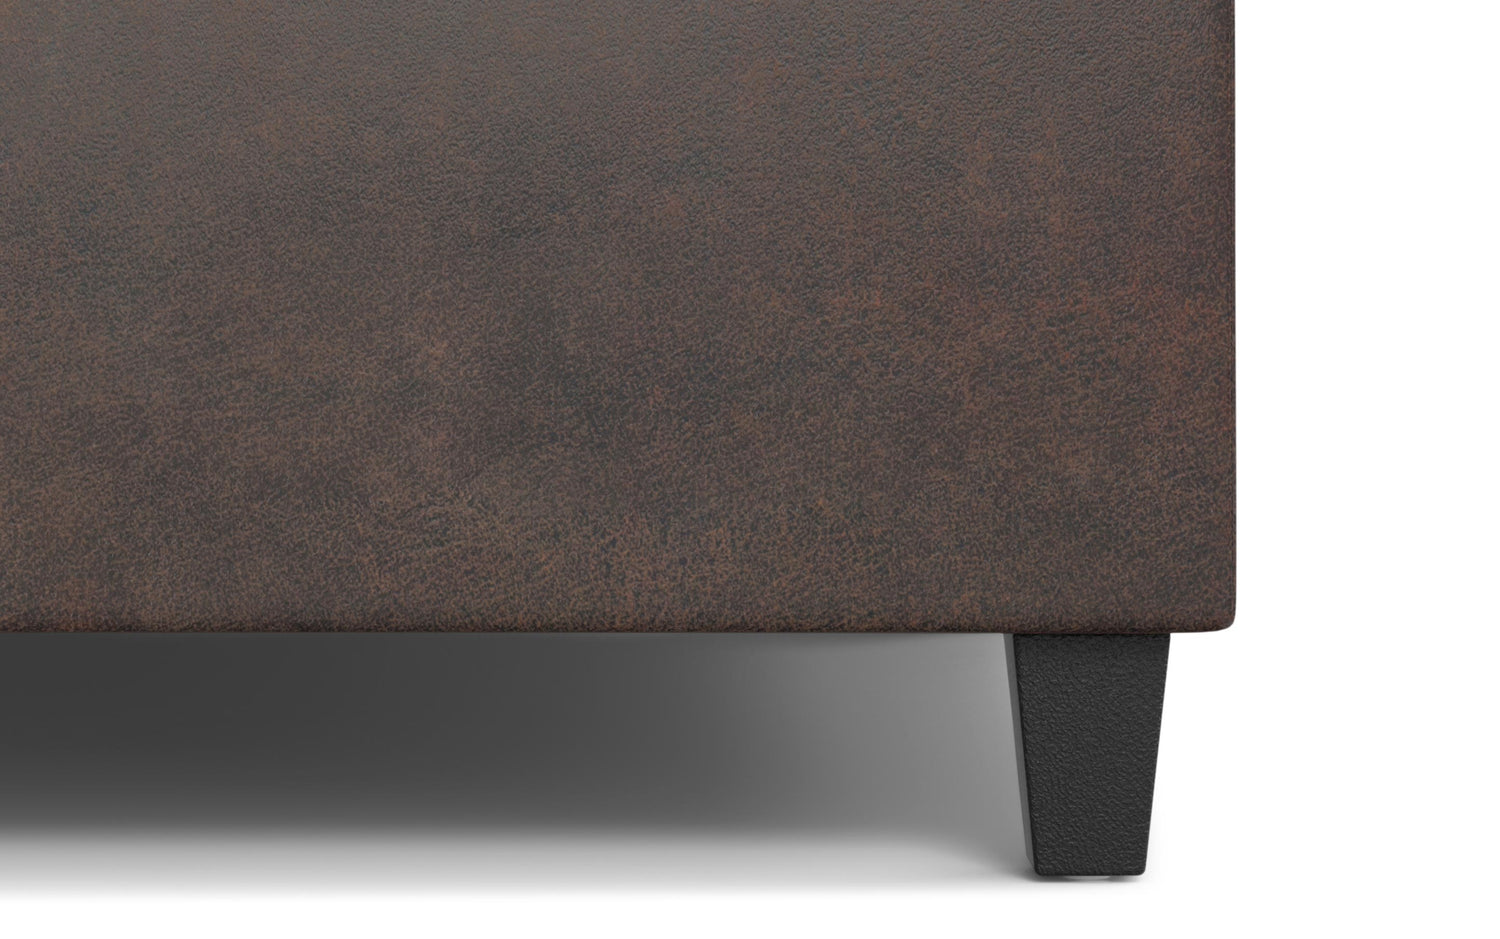 Distressed Brown Distressed Vegan Leather | Harrison Small Square Coffee Table Storage Ottoman in Distressed Vegan Leather